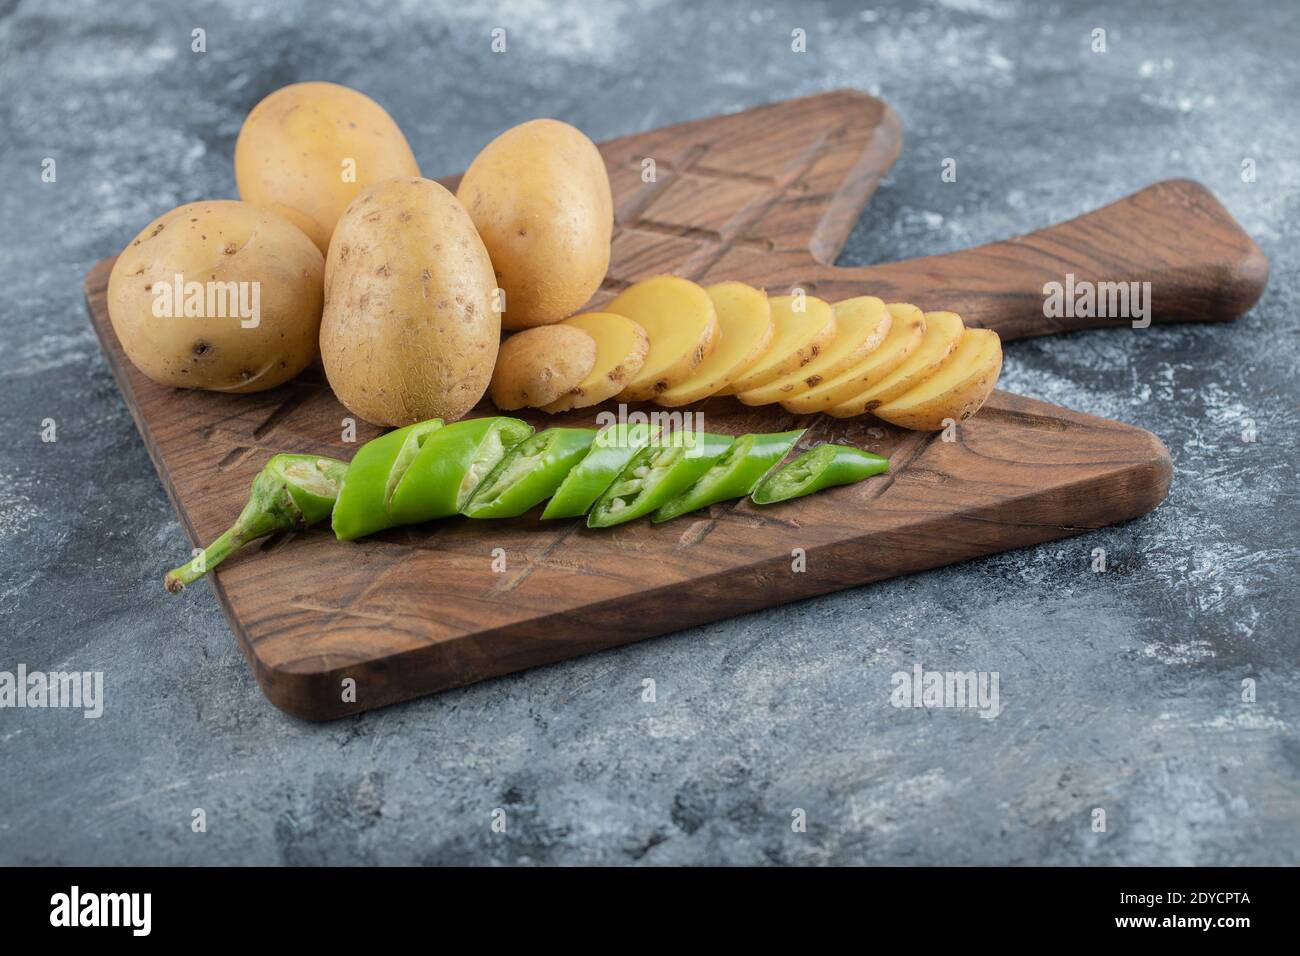 Man pouring salt over the sliced potatoes Stock Photo